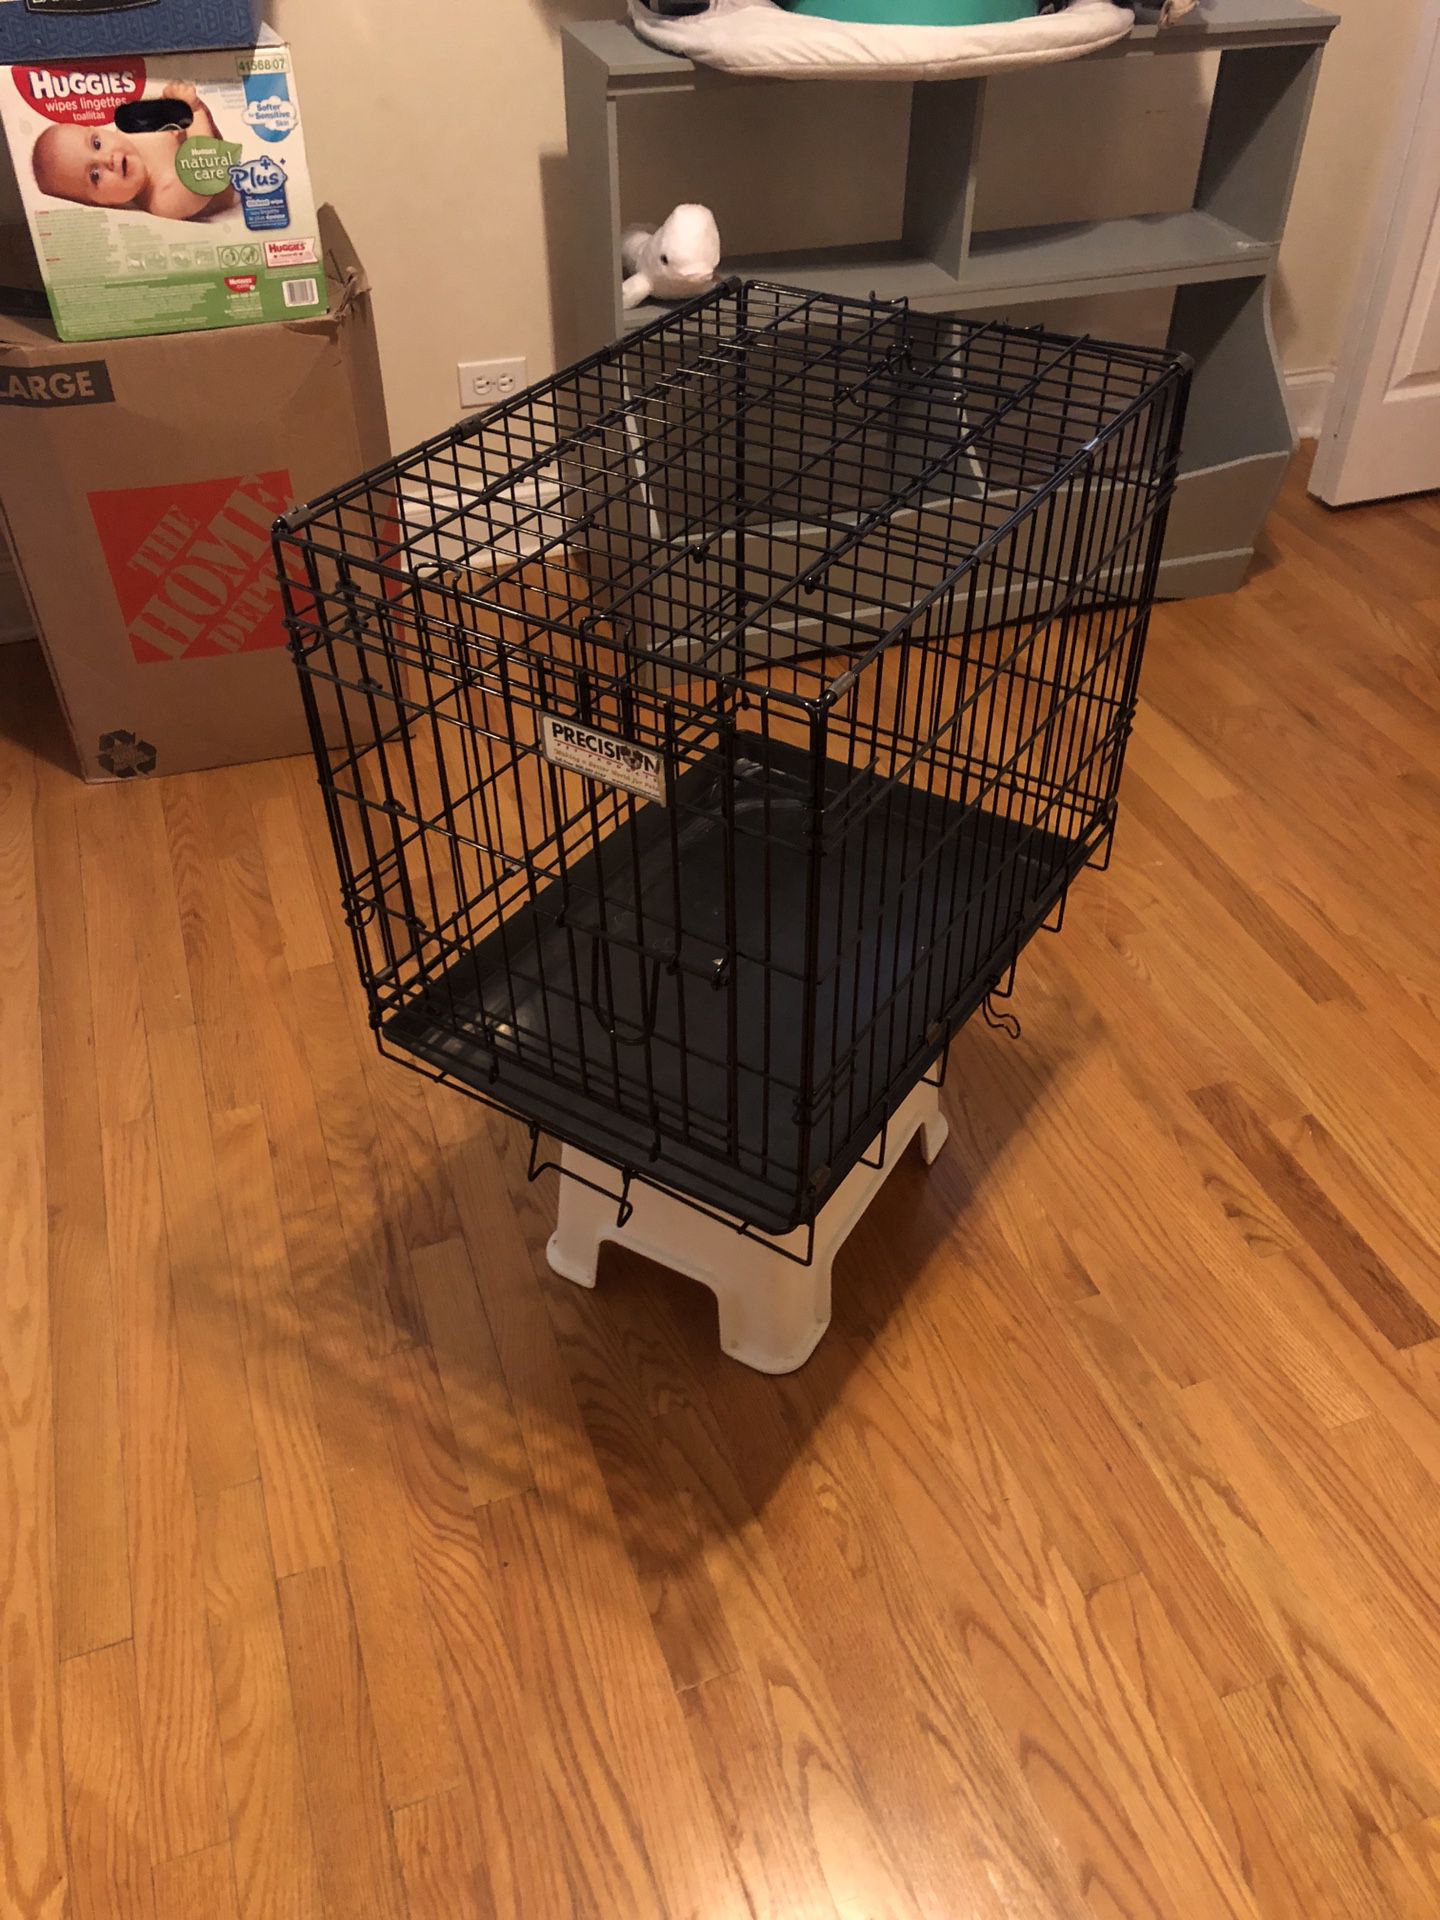 Dog crate for small dog 25lbs or less